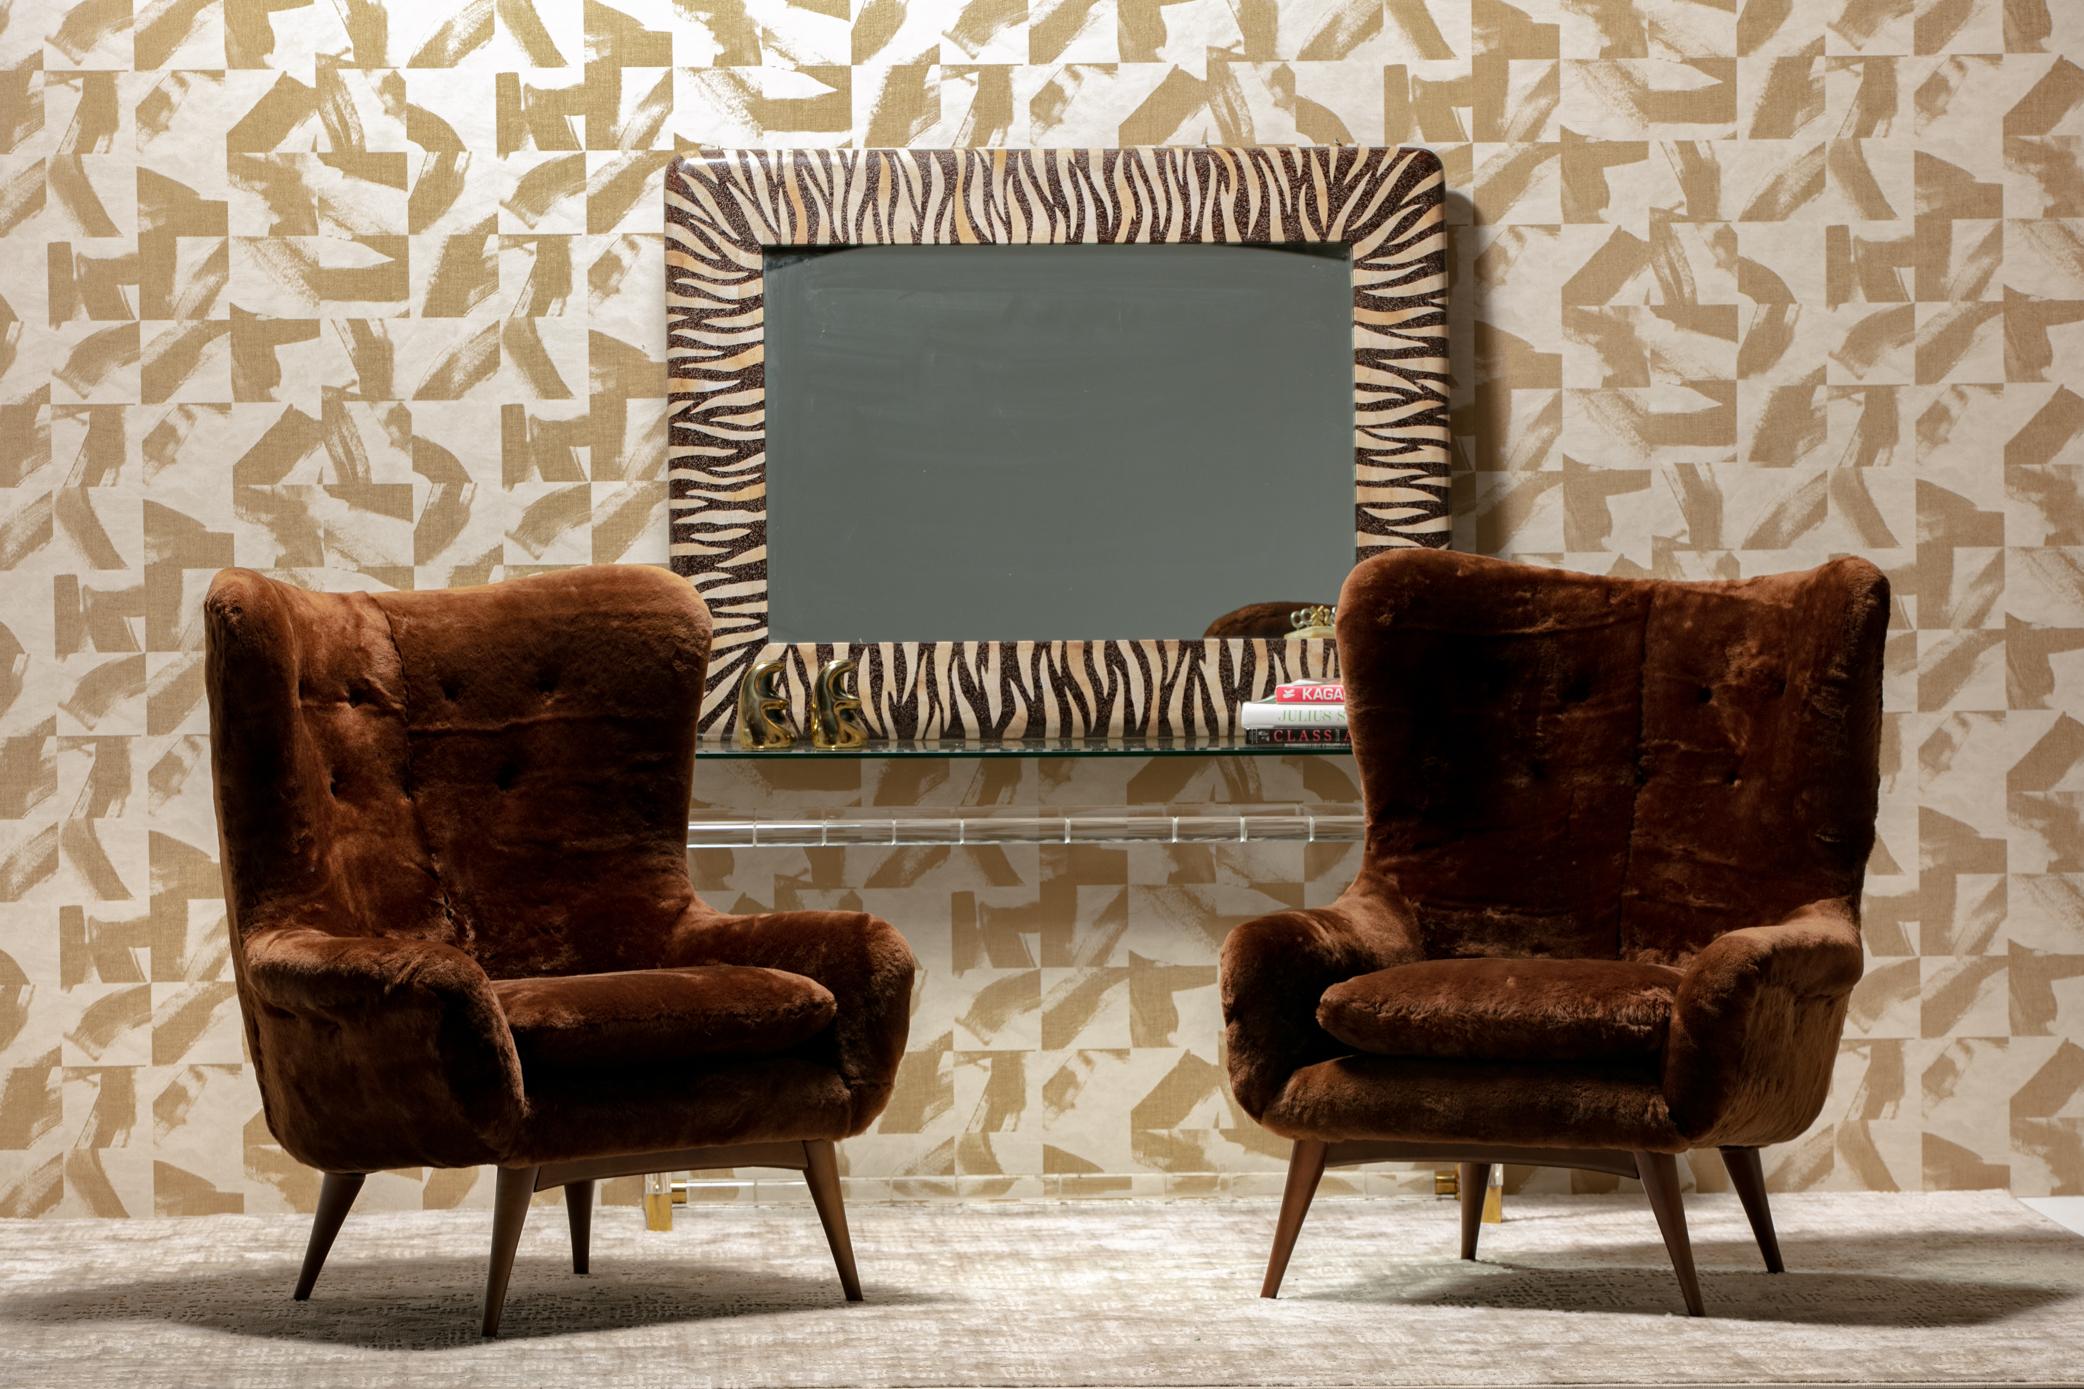 Gorgeous hand made 1980s Maitland Smith mirror made of crushed eggshells applied by hand onto a wooden frame to create a Zebra Motif pattern reminiscent of the highly prized and sought after Art Deco period eggshell pieces by acclaimed designer Jean